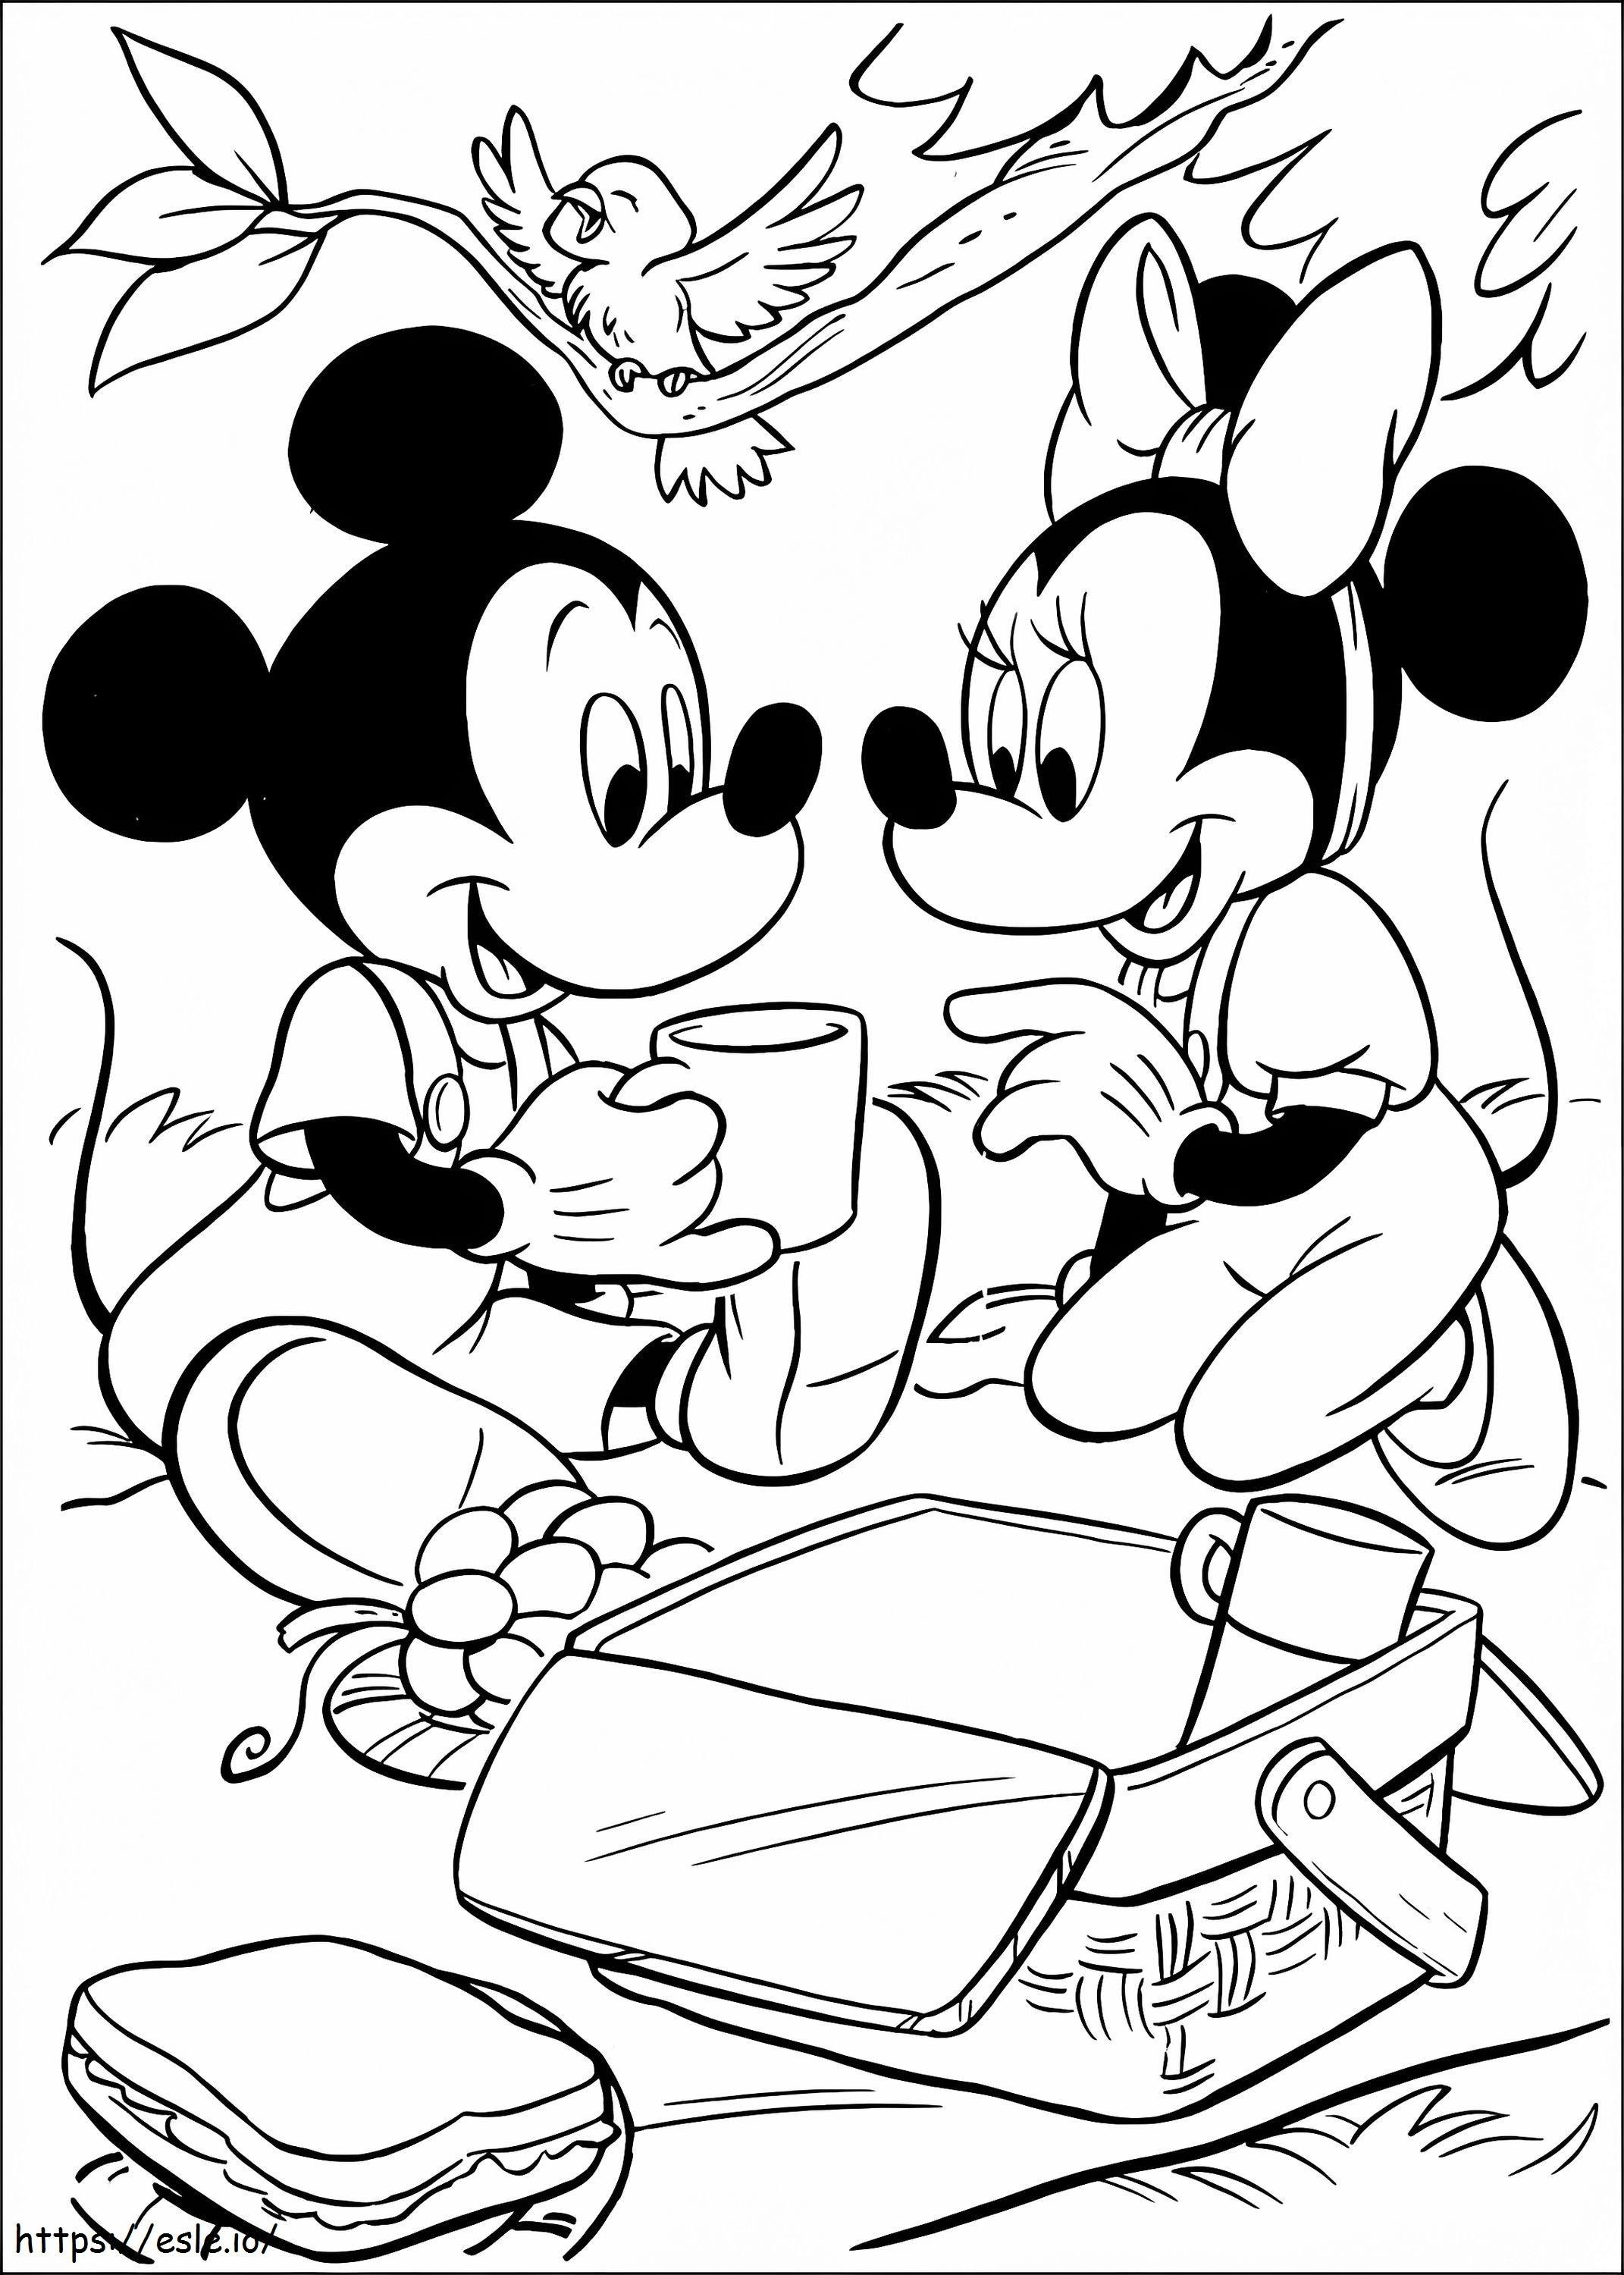 Mickey And Minnie On A Picnic coloring page